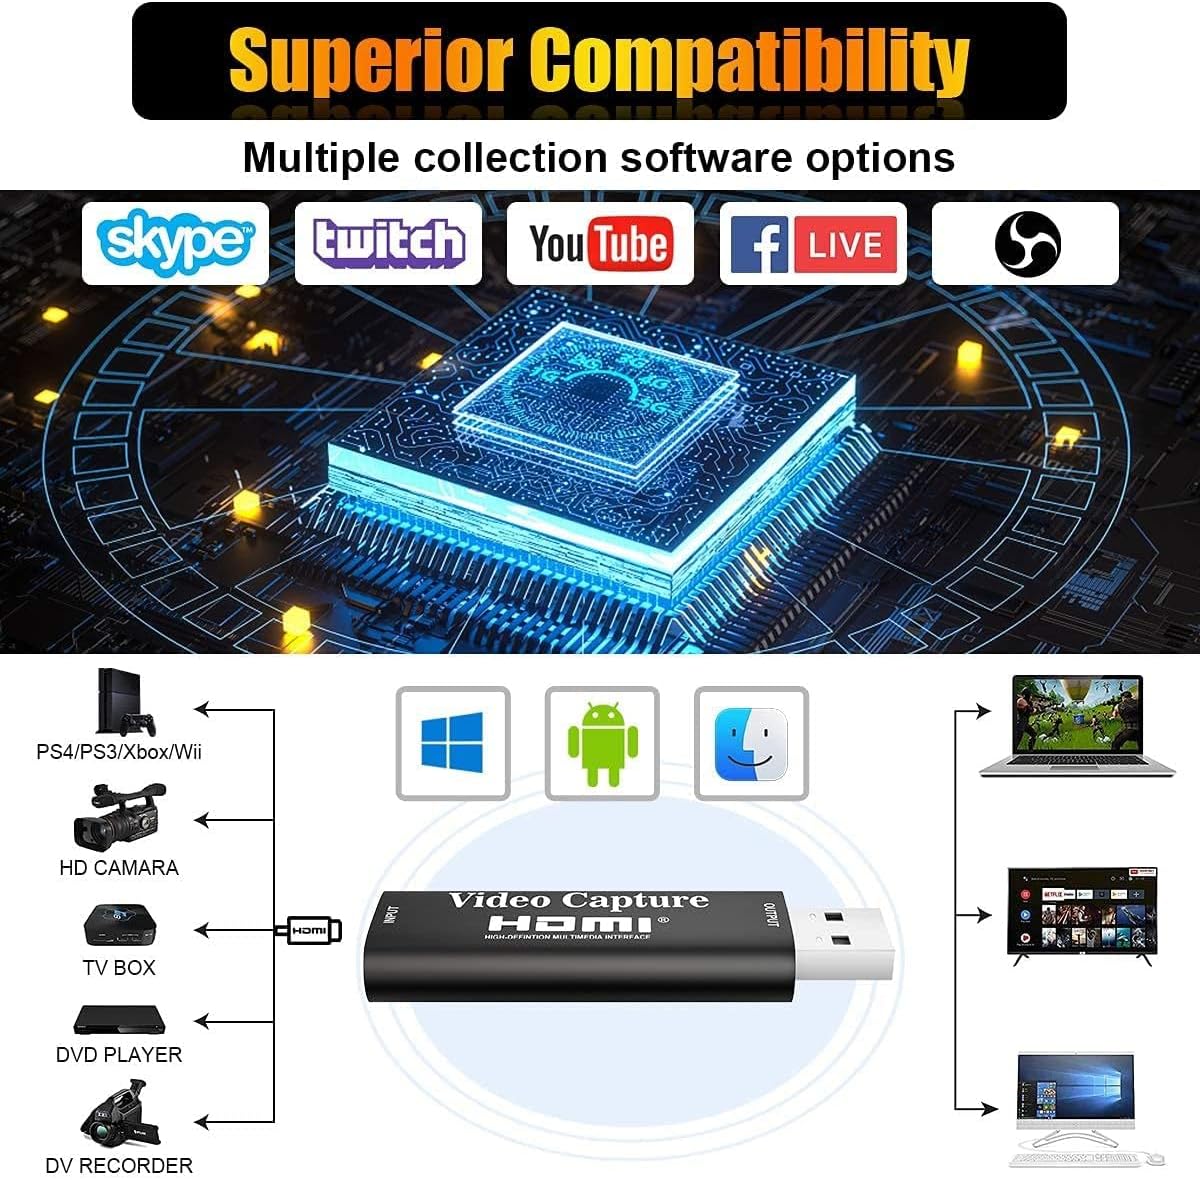  HDMI Video Capture Card, 4K HDMI to USB 2.0 Video Audio Converter, Full HD 1080p for Editing Video/Games/Streaming/Online Teaching